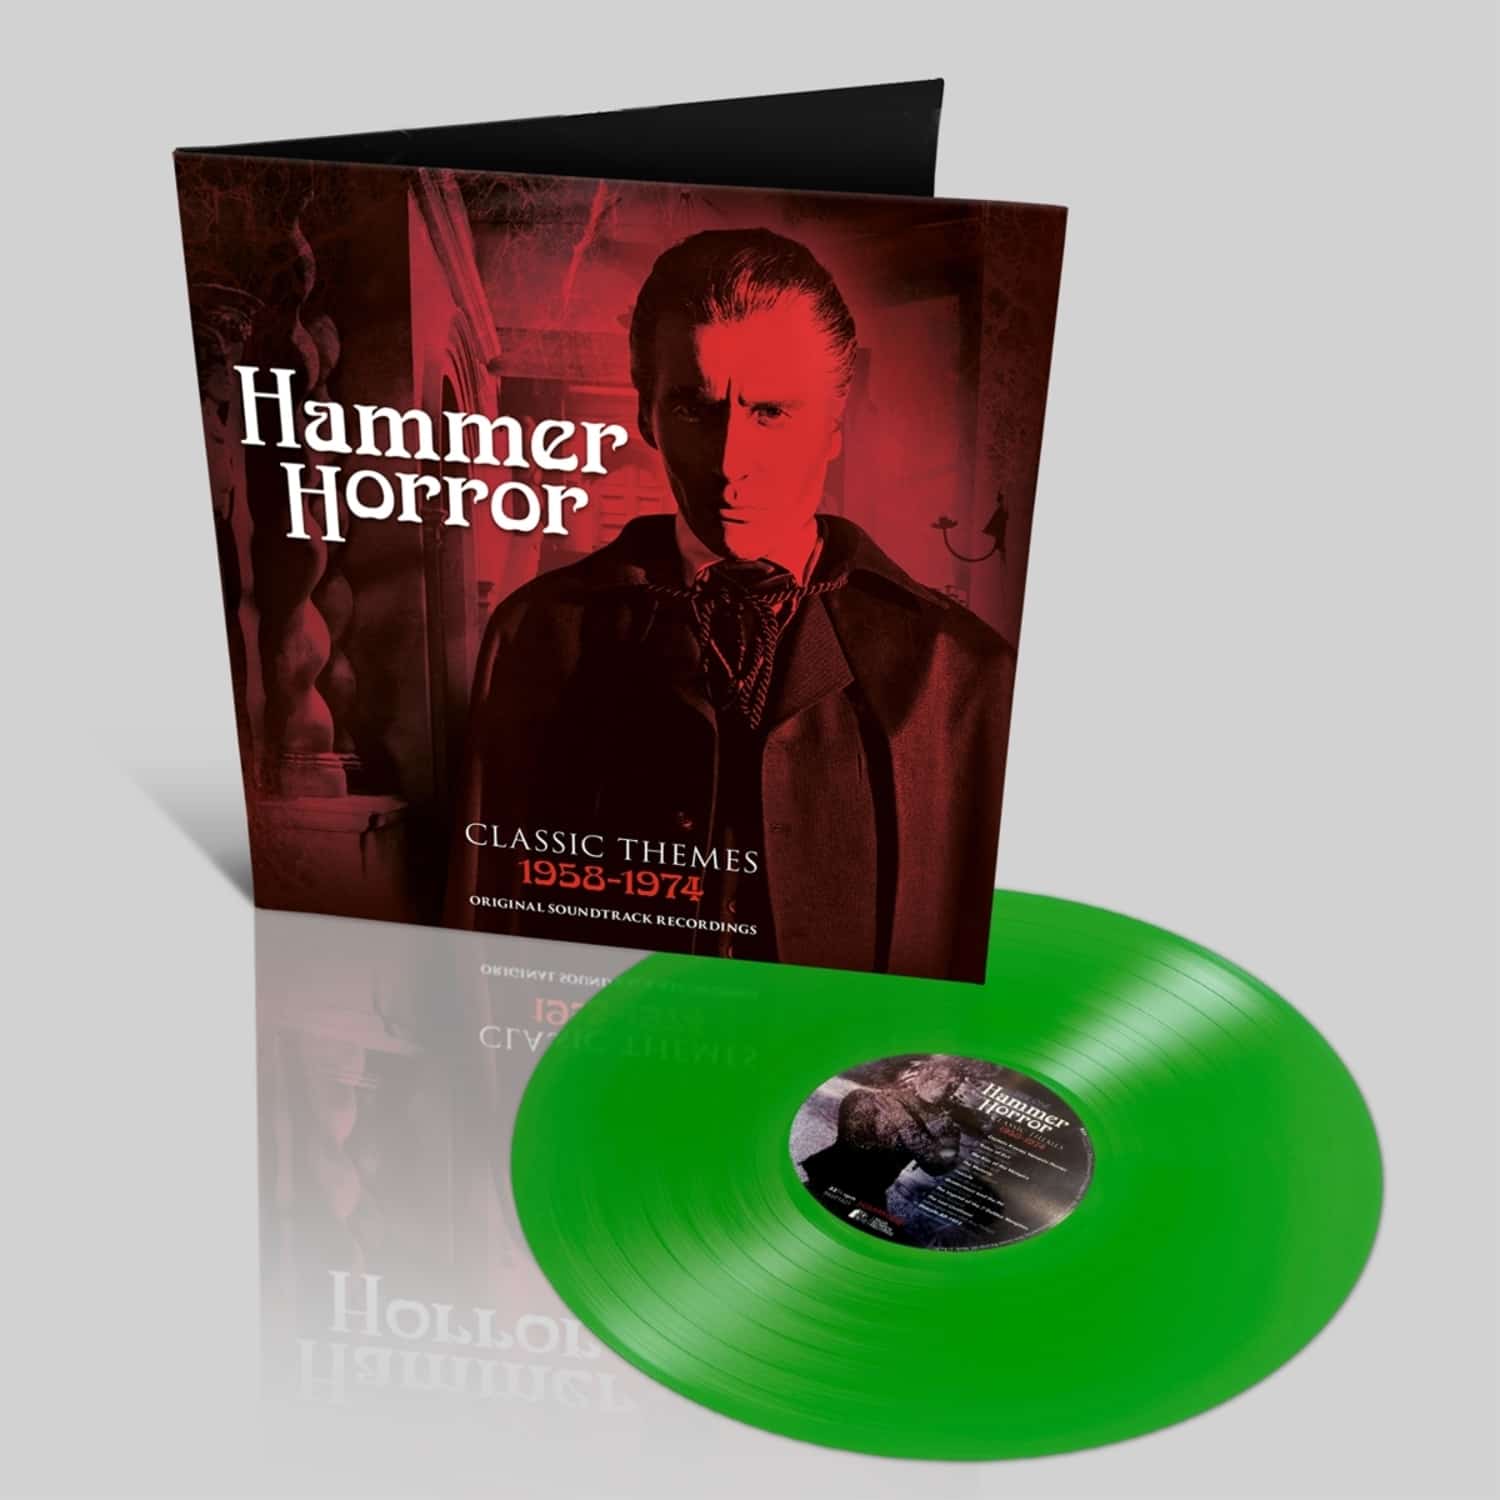 Ost - HAMMER HORROR CLASSIC THEMES 